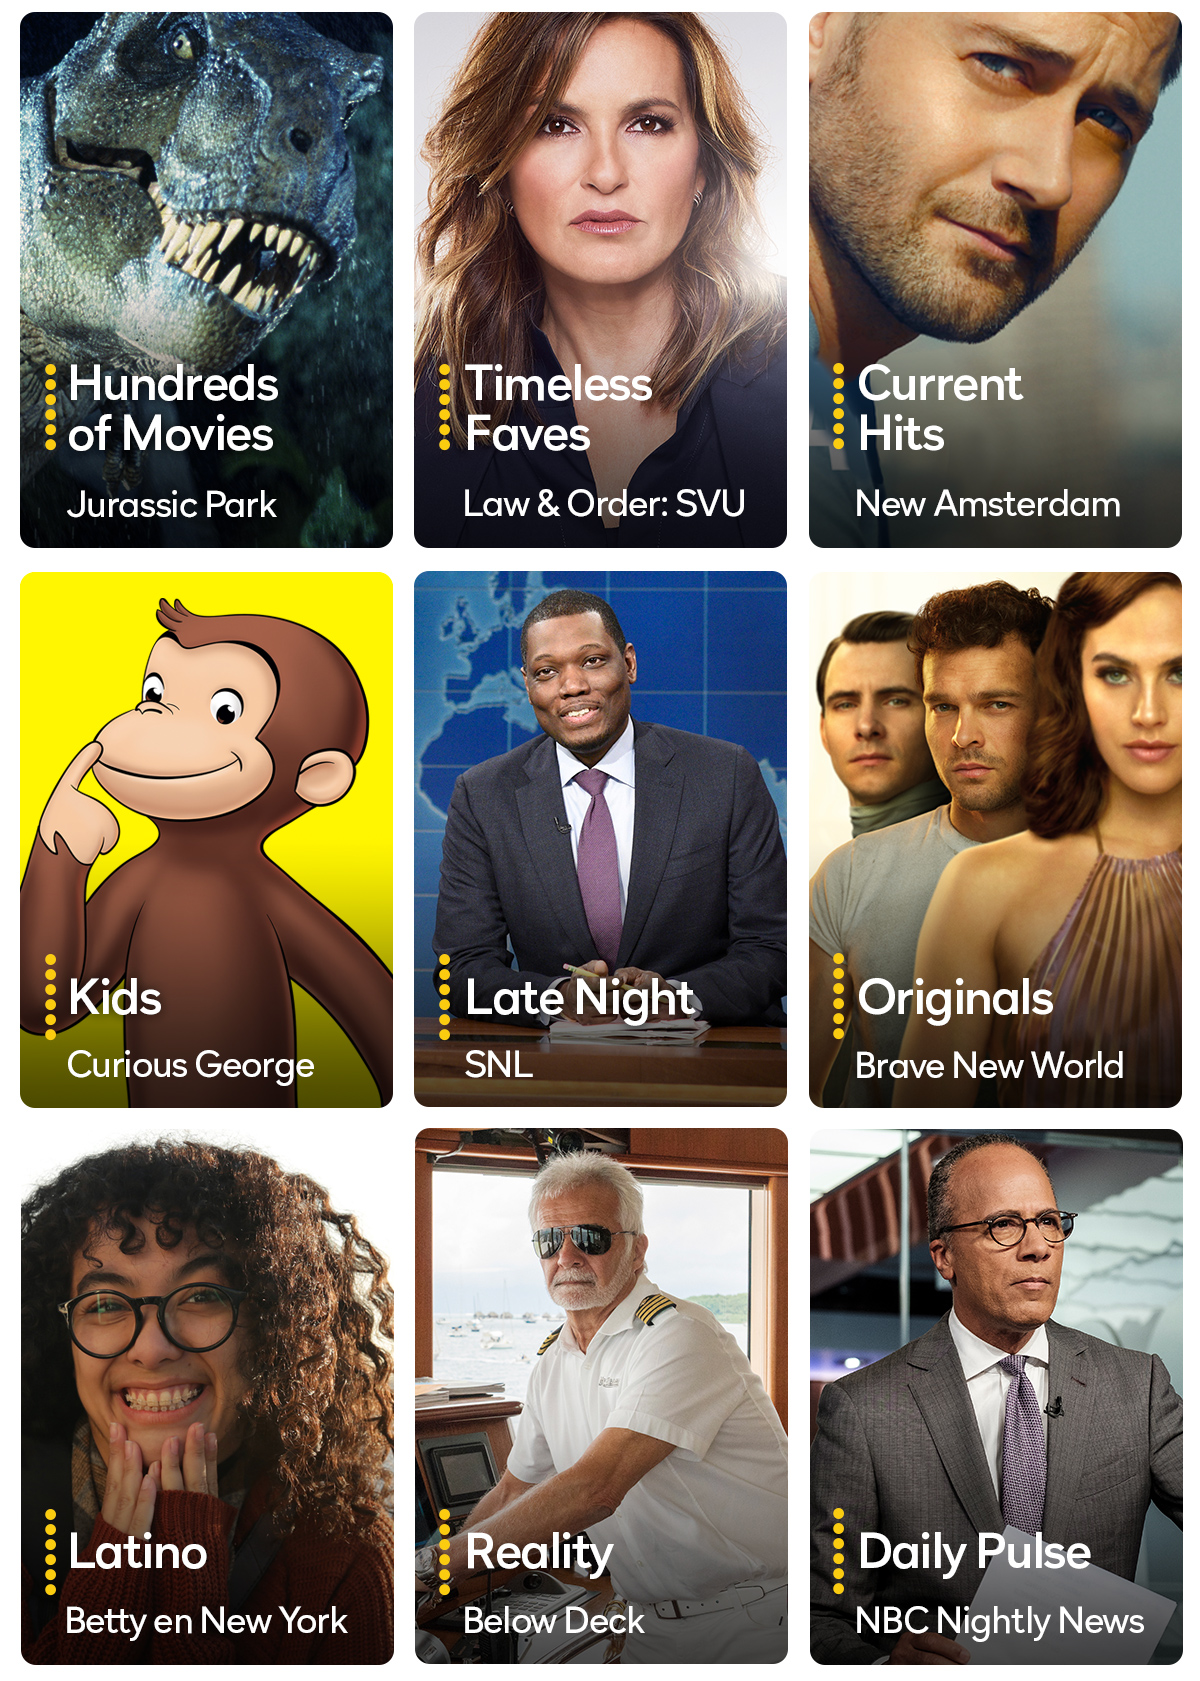 Hundreds of Movies Jurassic Park | Timeless Faves Law & Order:SVU | Current Hits New Amsterdam | Kids Curious George | Late Night SNL | Originals Brave New World | Latino Betty en New York | Reality Below Deck | Daily Pulse NBC Nightly News